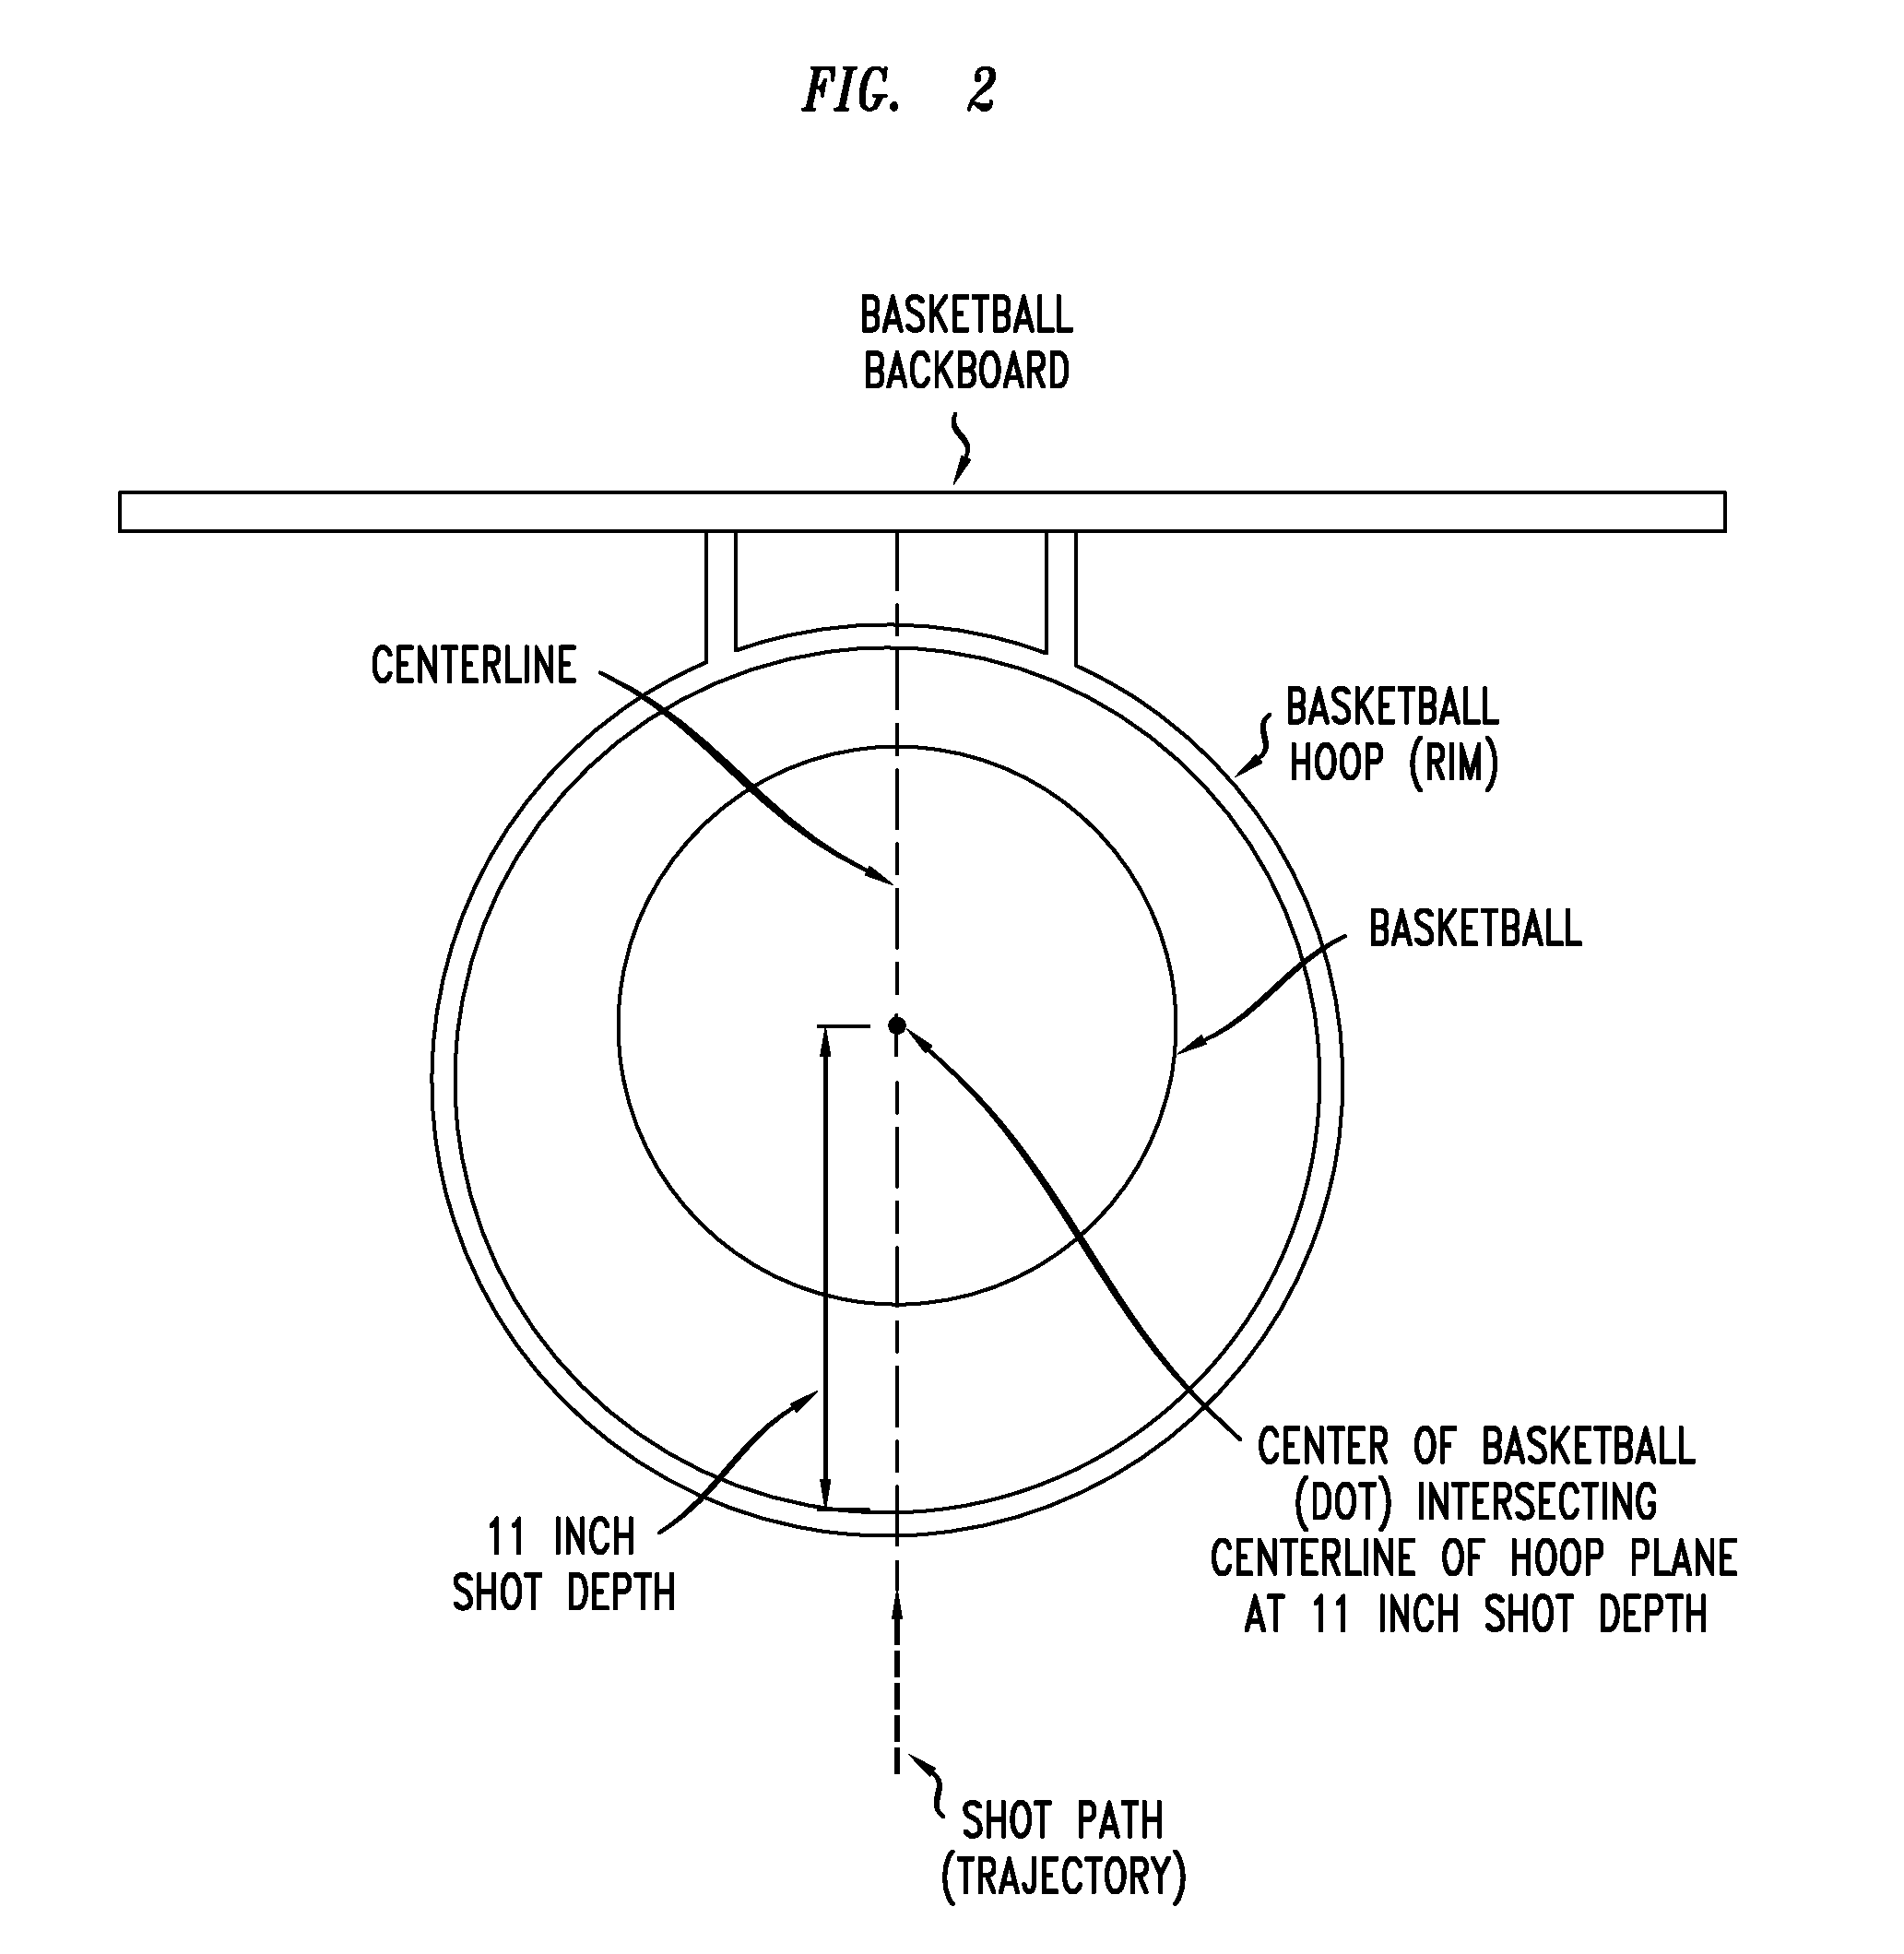 Basketball training device, system and method